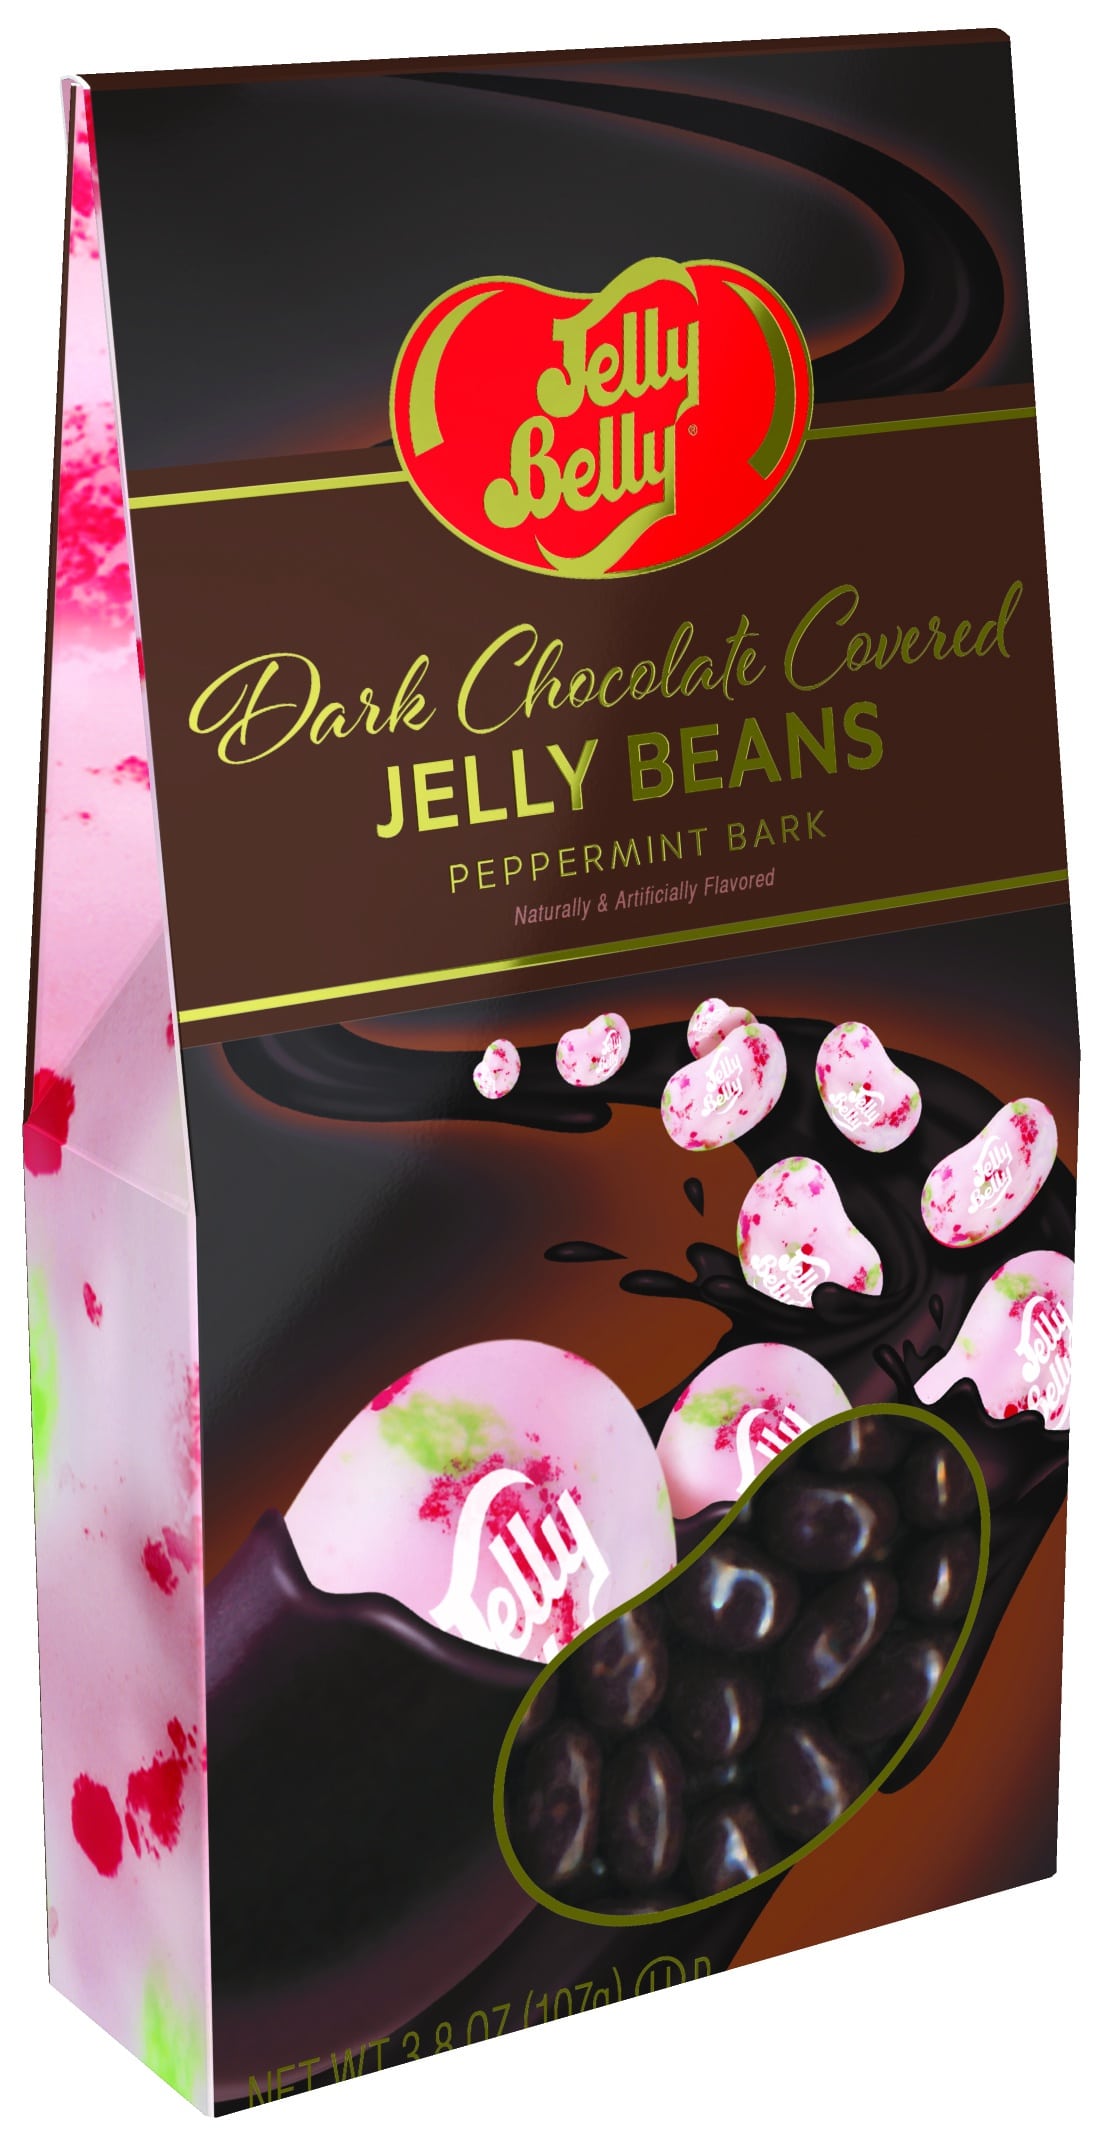 Discovering the Mysterious History of Jelly Beans